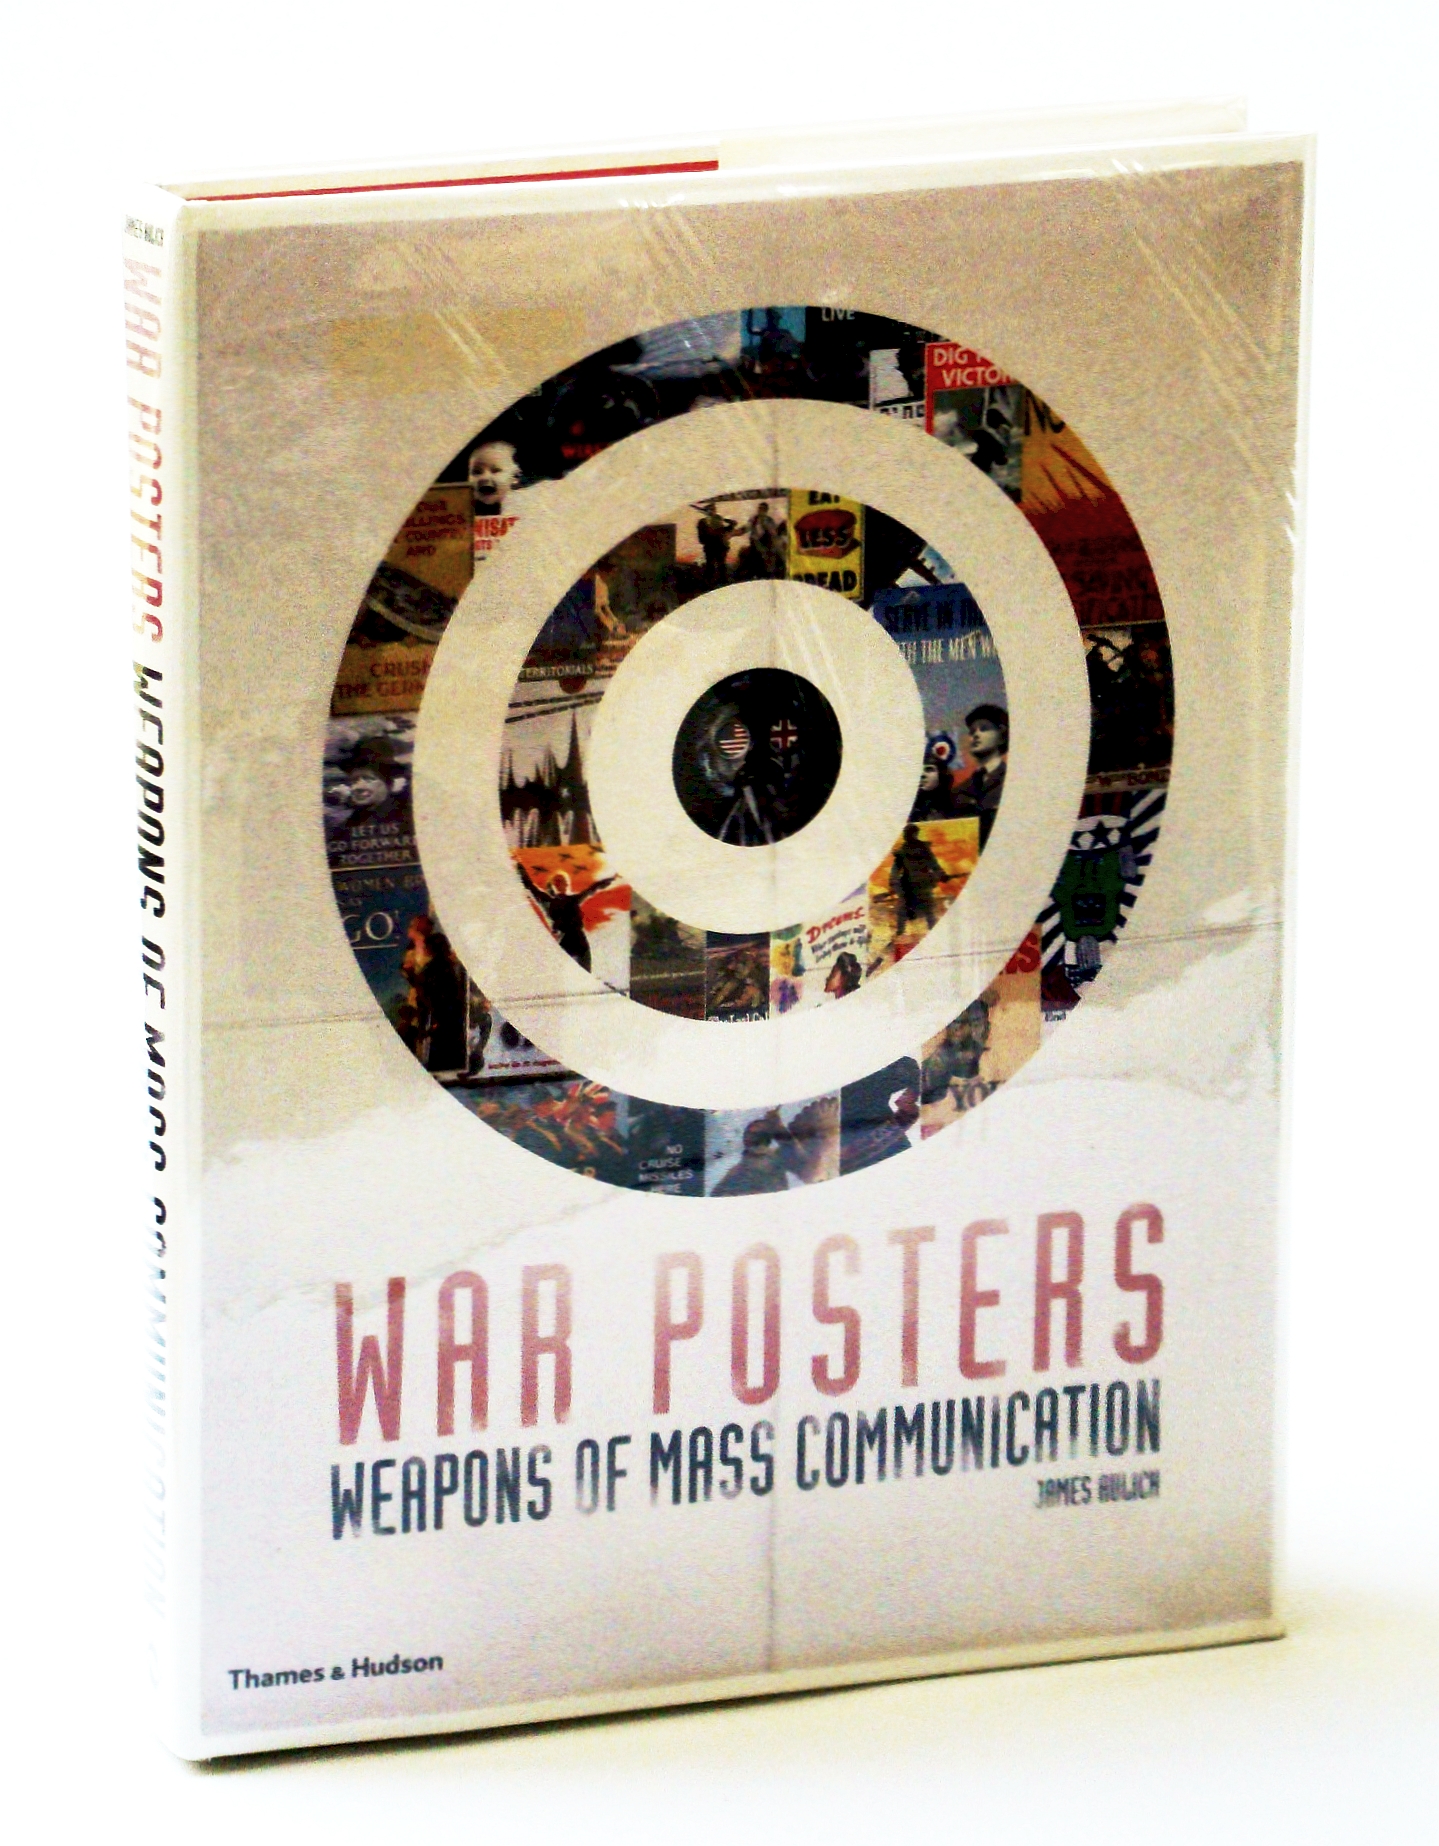 AULICH, JAMES - War Posters: Weapons of Mass Communication